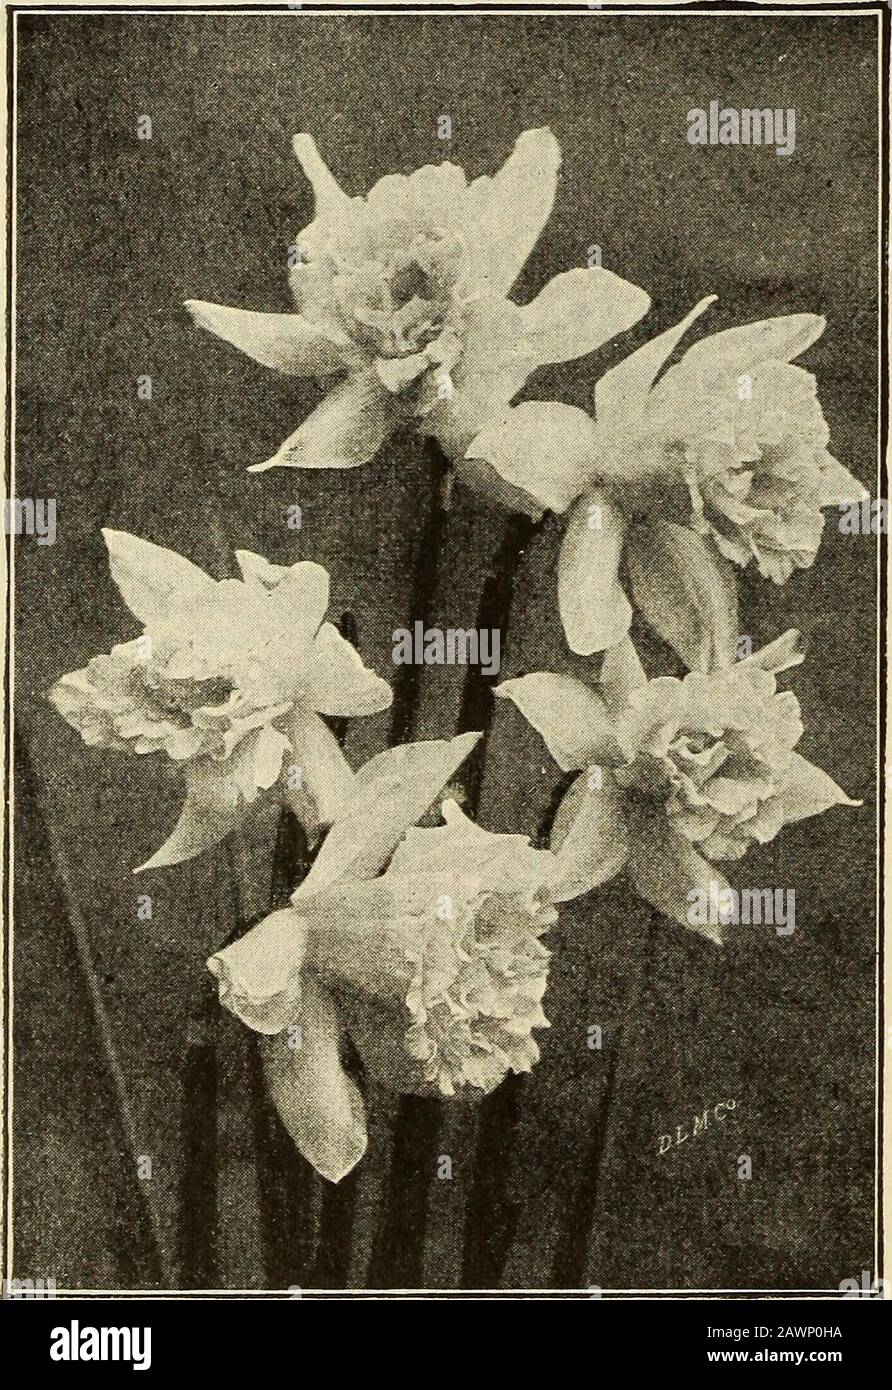 Maule's midsummer and fall guide of seeds, bulbs, plants, etc: 1919 . th is white.10 cts. each, $1.00 per doz., postpaid.GLORY OF LEIDEN. The King of Daffodils,^being one of the most massive of the Giant Trump-et varieties. Immense deep yellow trumpet andperianth. A perfect flower of great substance.15 cts. each, 2 for 25 cts., $1.30 per doz.,postpaid.GOLDEN SPUR. A very popular variety. The large,rich, deep yellow flowers are borne on long, stiff stems.Produces freely and will do well anywhere.10 cts. each, 3 for 25 cts., 90 cts. per doz., Ipostpaid.PRINCEPS. Long deep yellow trumpet with sul Stock Photo